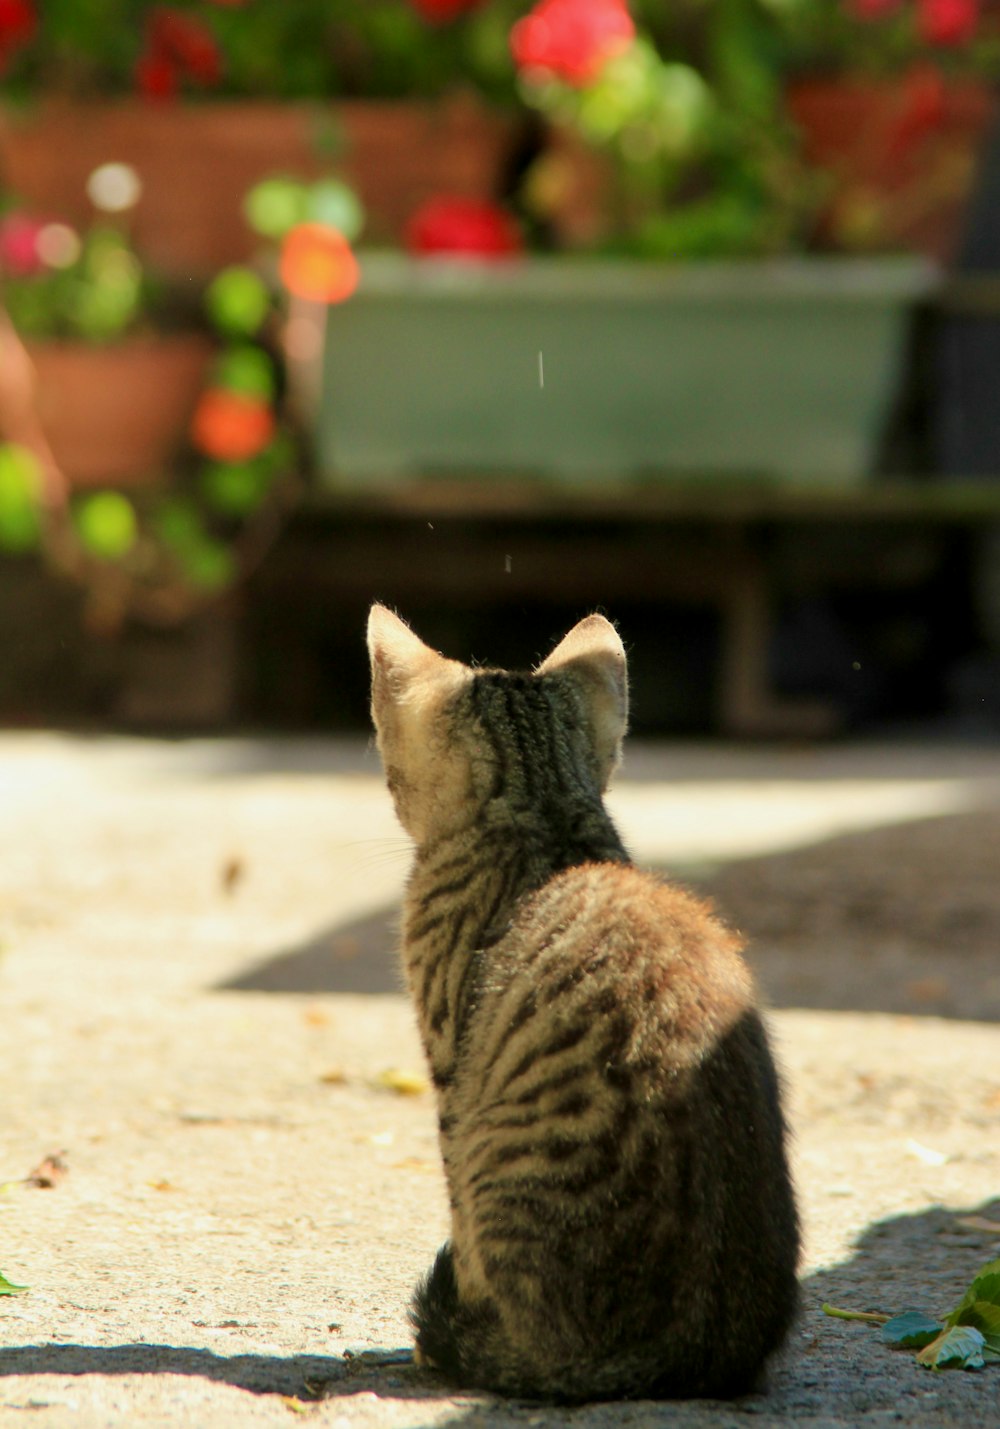 a cat sitting on the ground in front of a potted plant